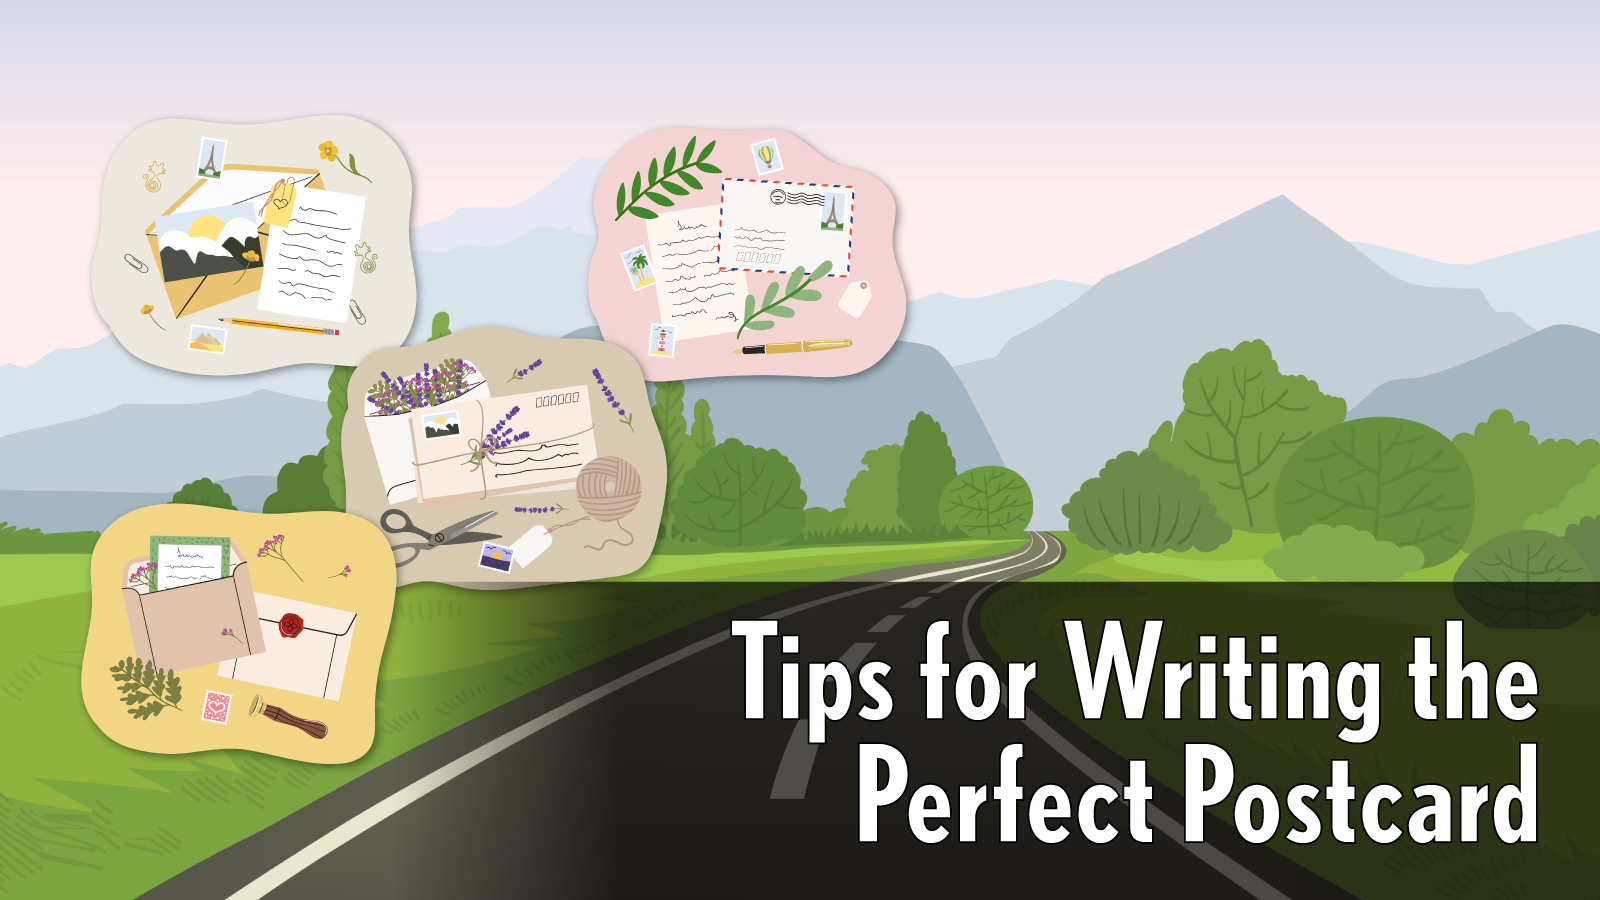 Tips for Writing the Perfect Postcard